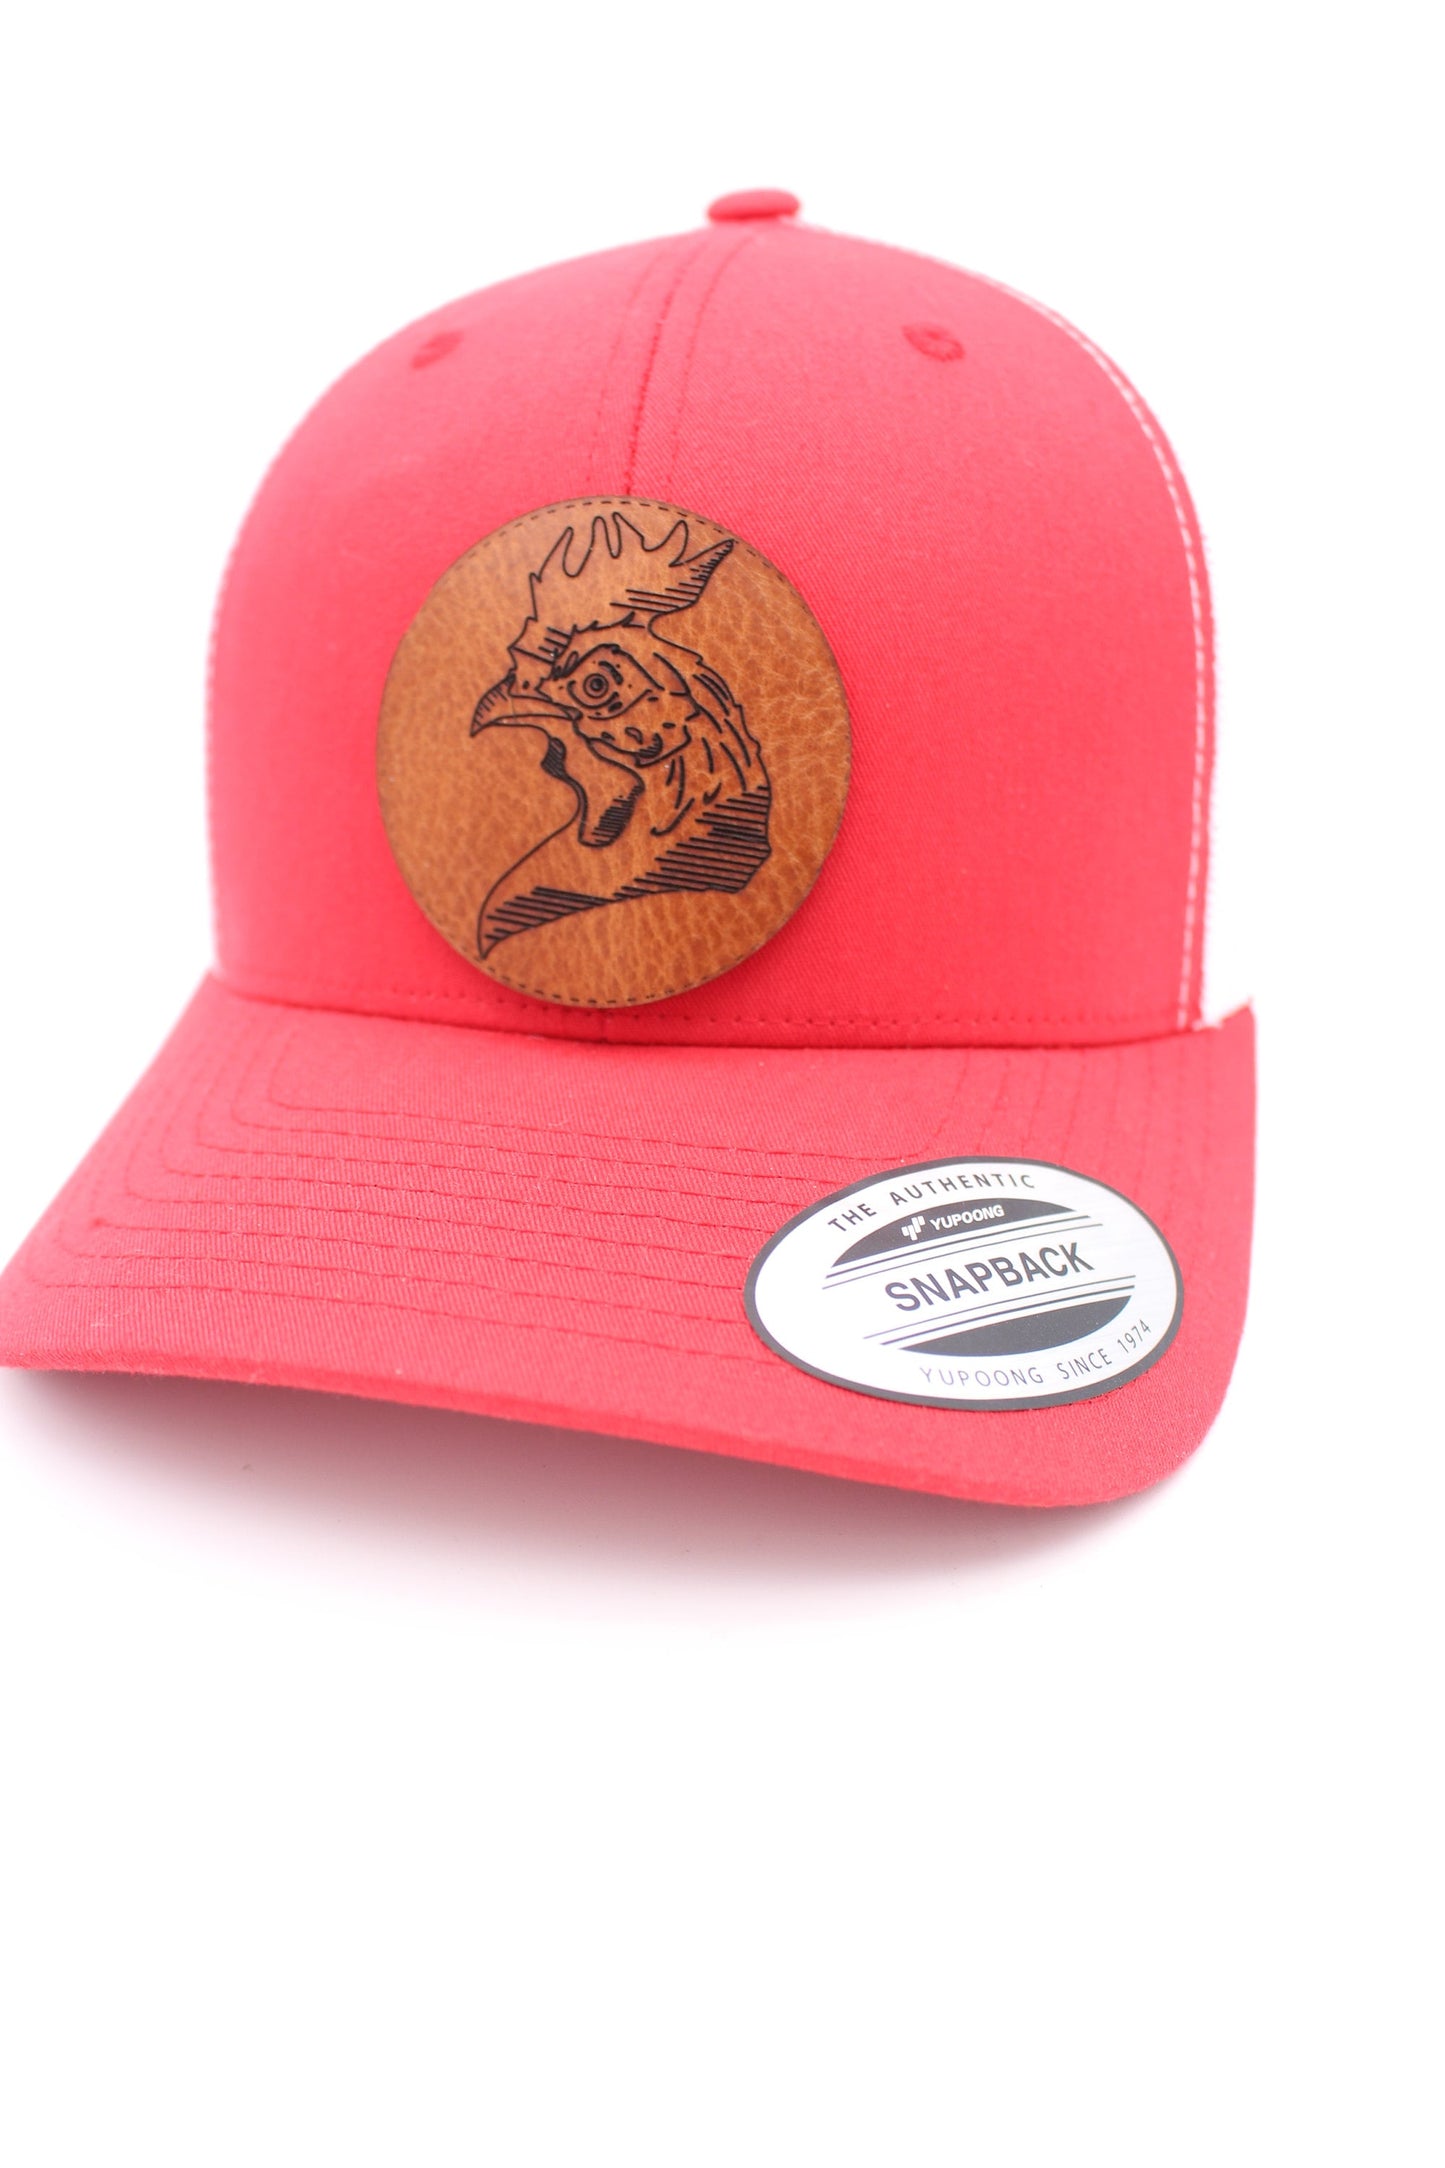 Rooster Leather Patch Hat Mesh Back Snapback Ball Cap